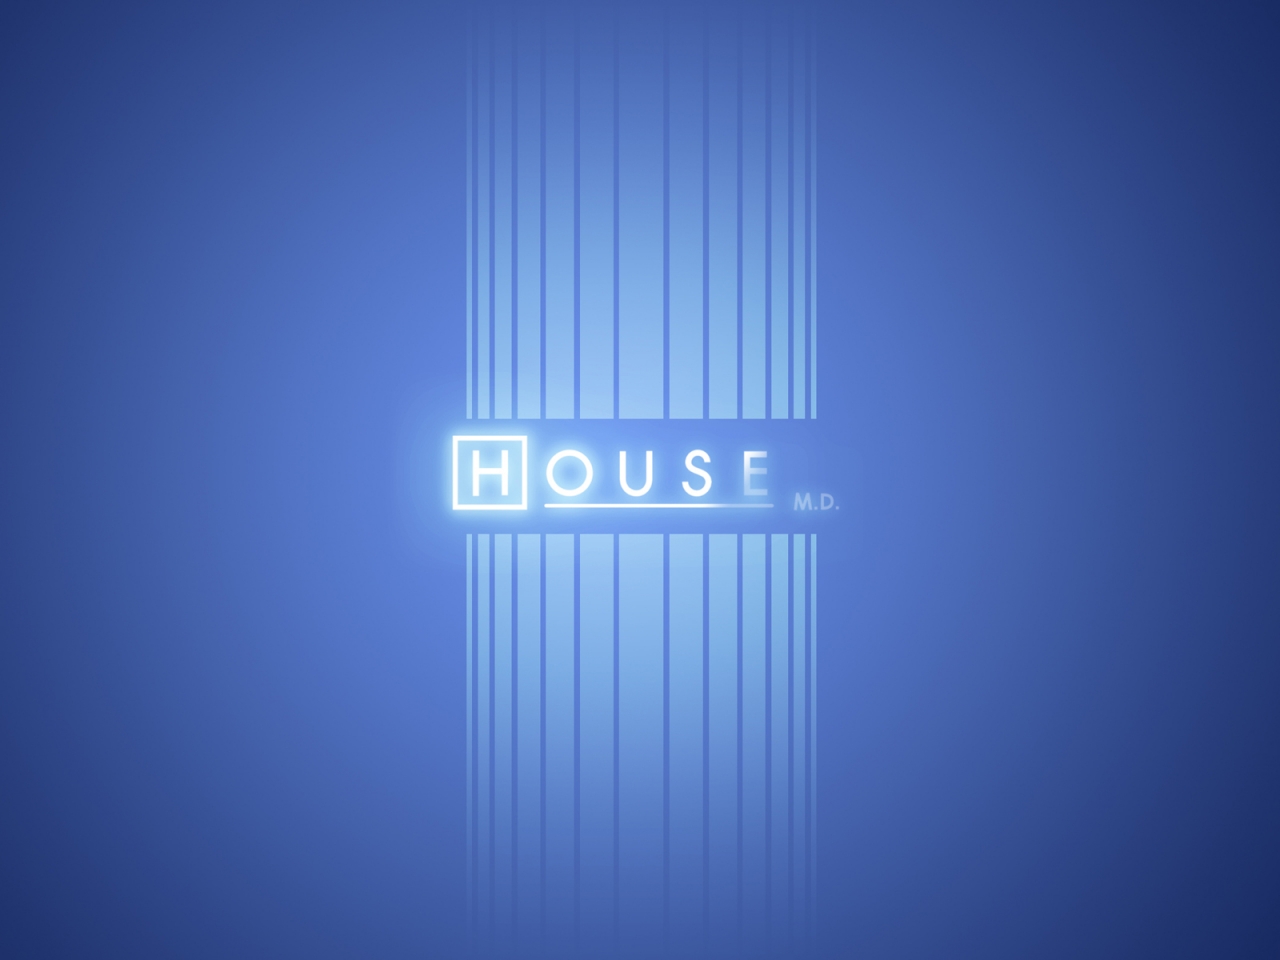 House MD Logo for 1280 x 960 resolution